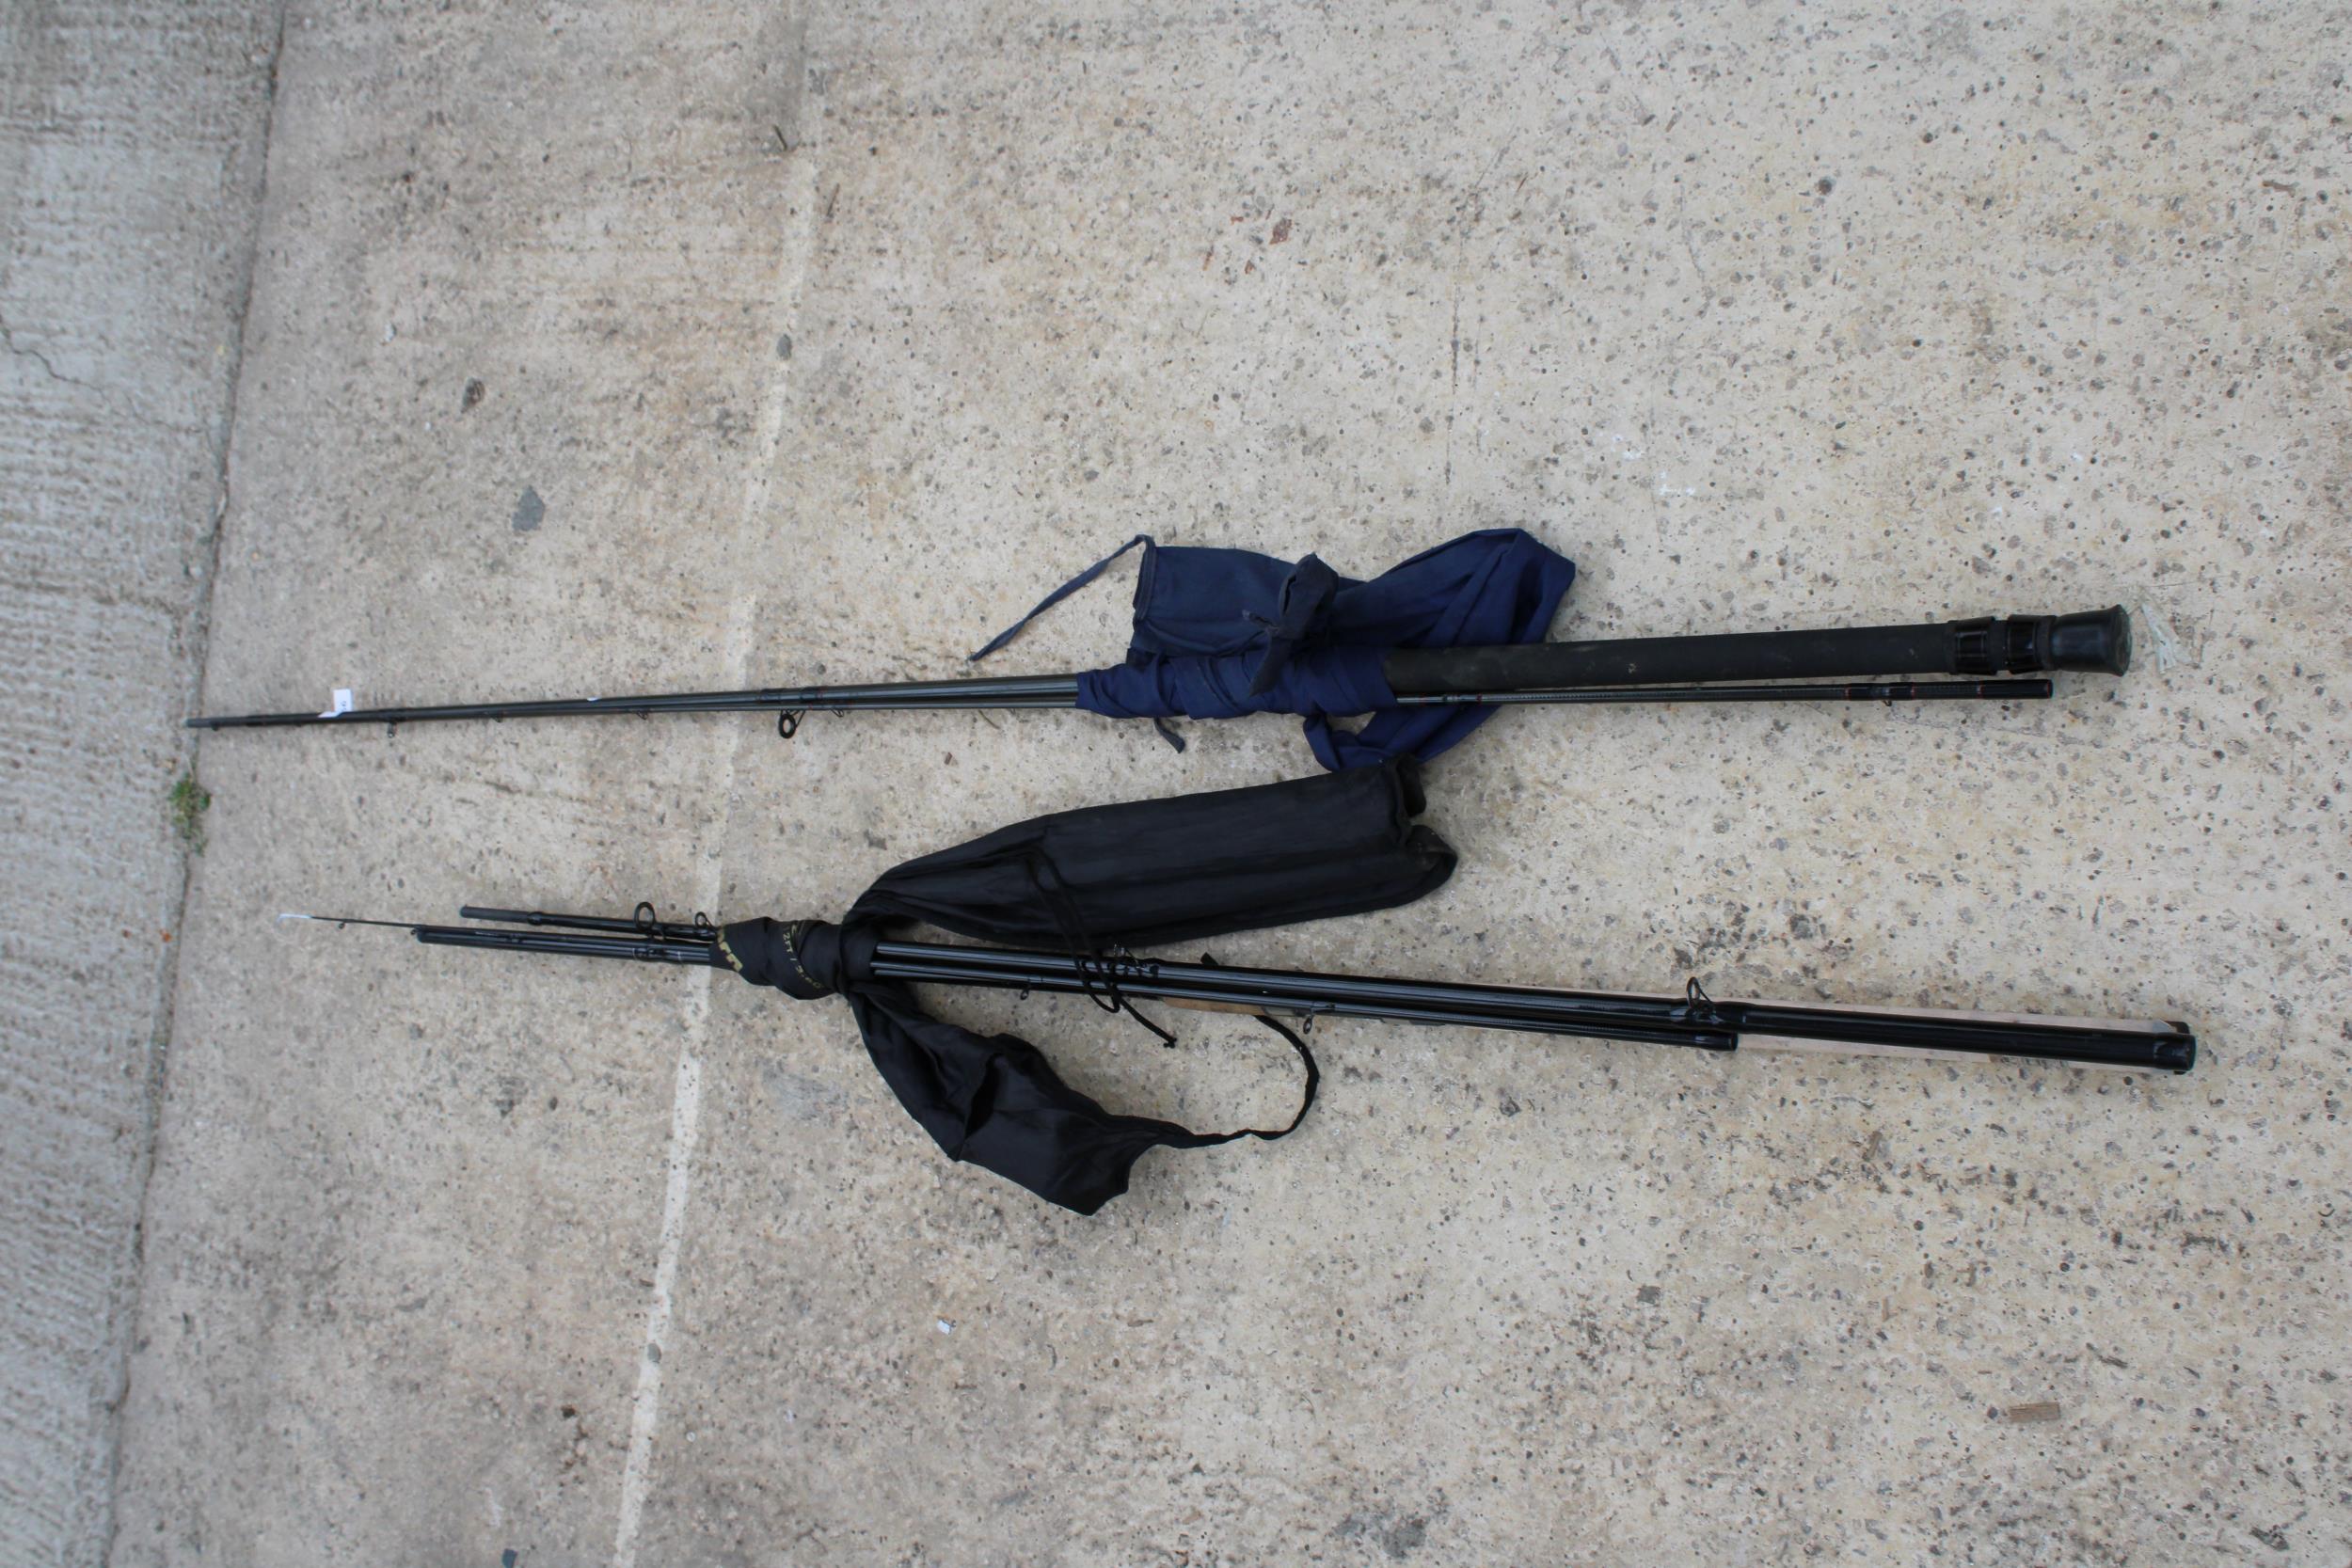 TWO FISHING RODS TO INCLUDE A ZEBCO THREE SECTION ROD